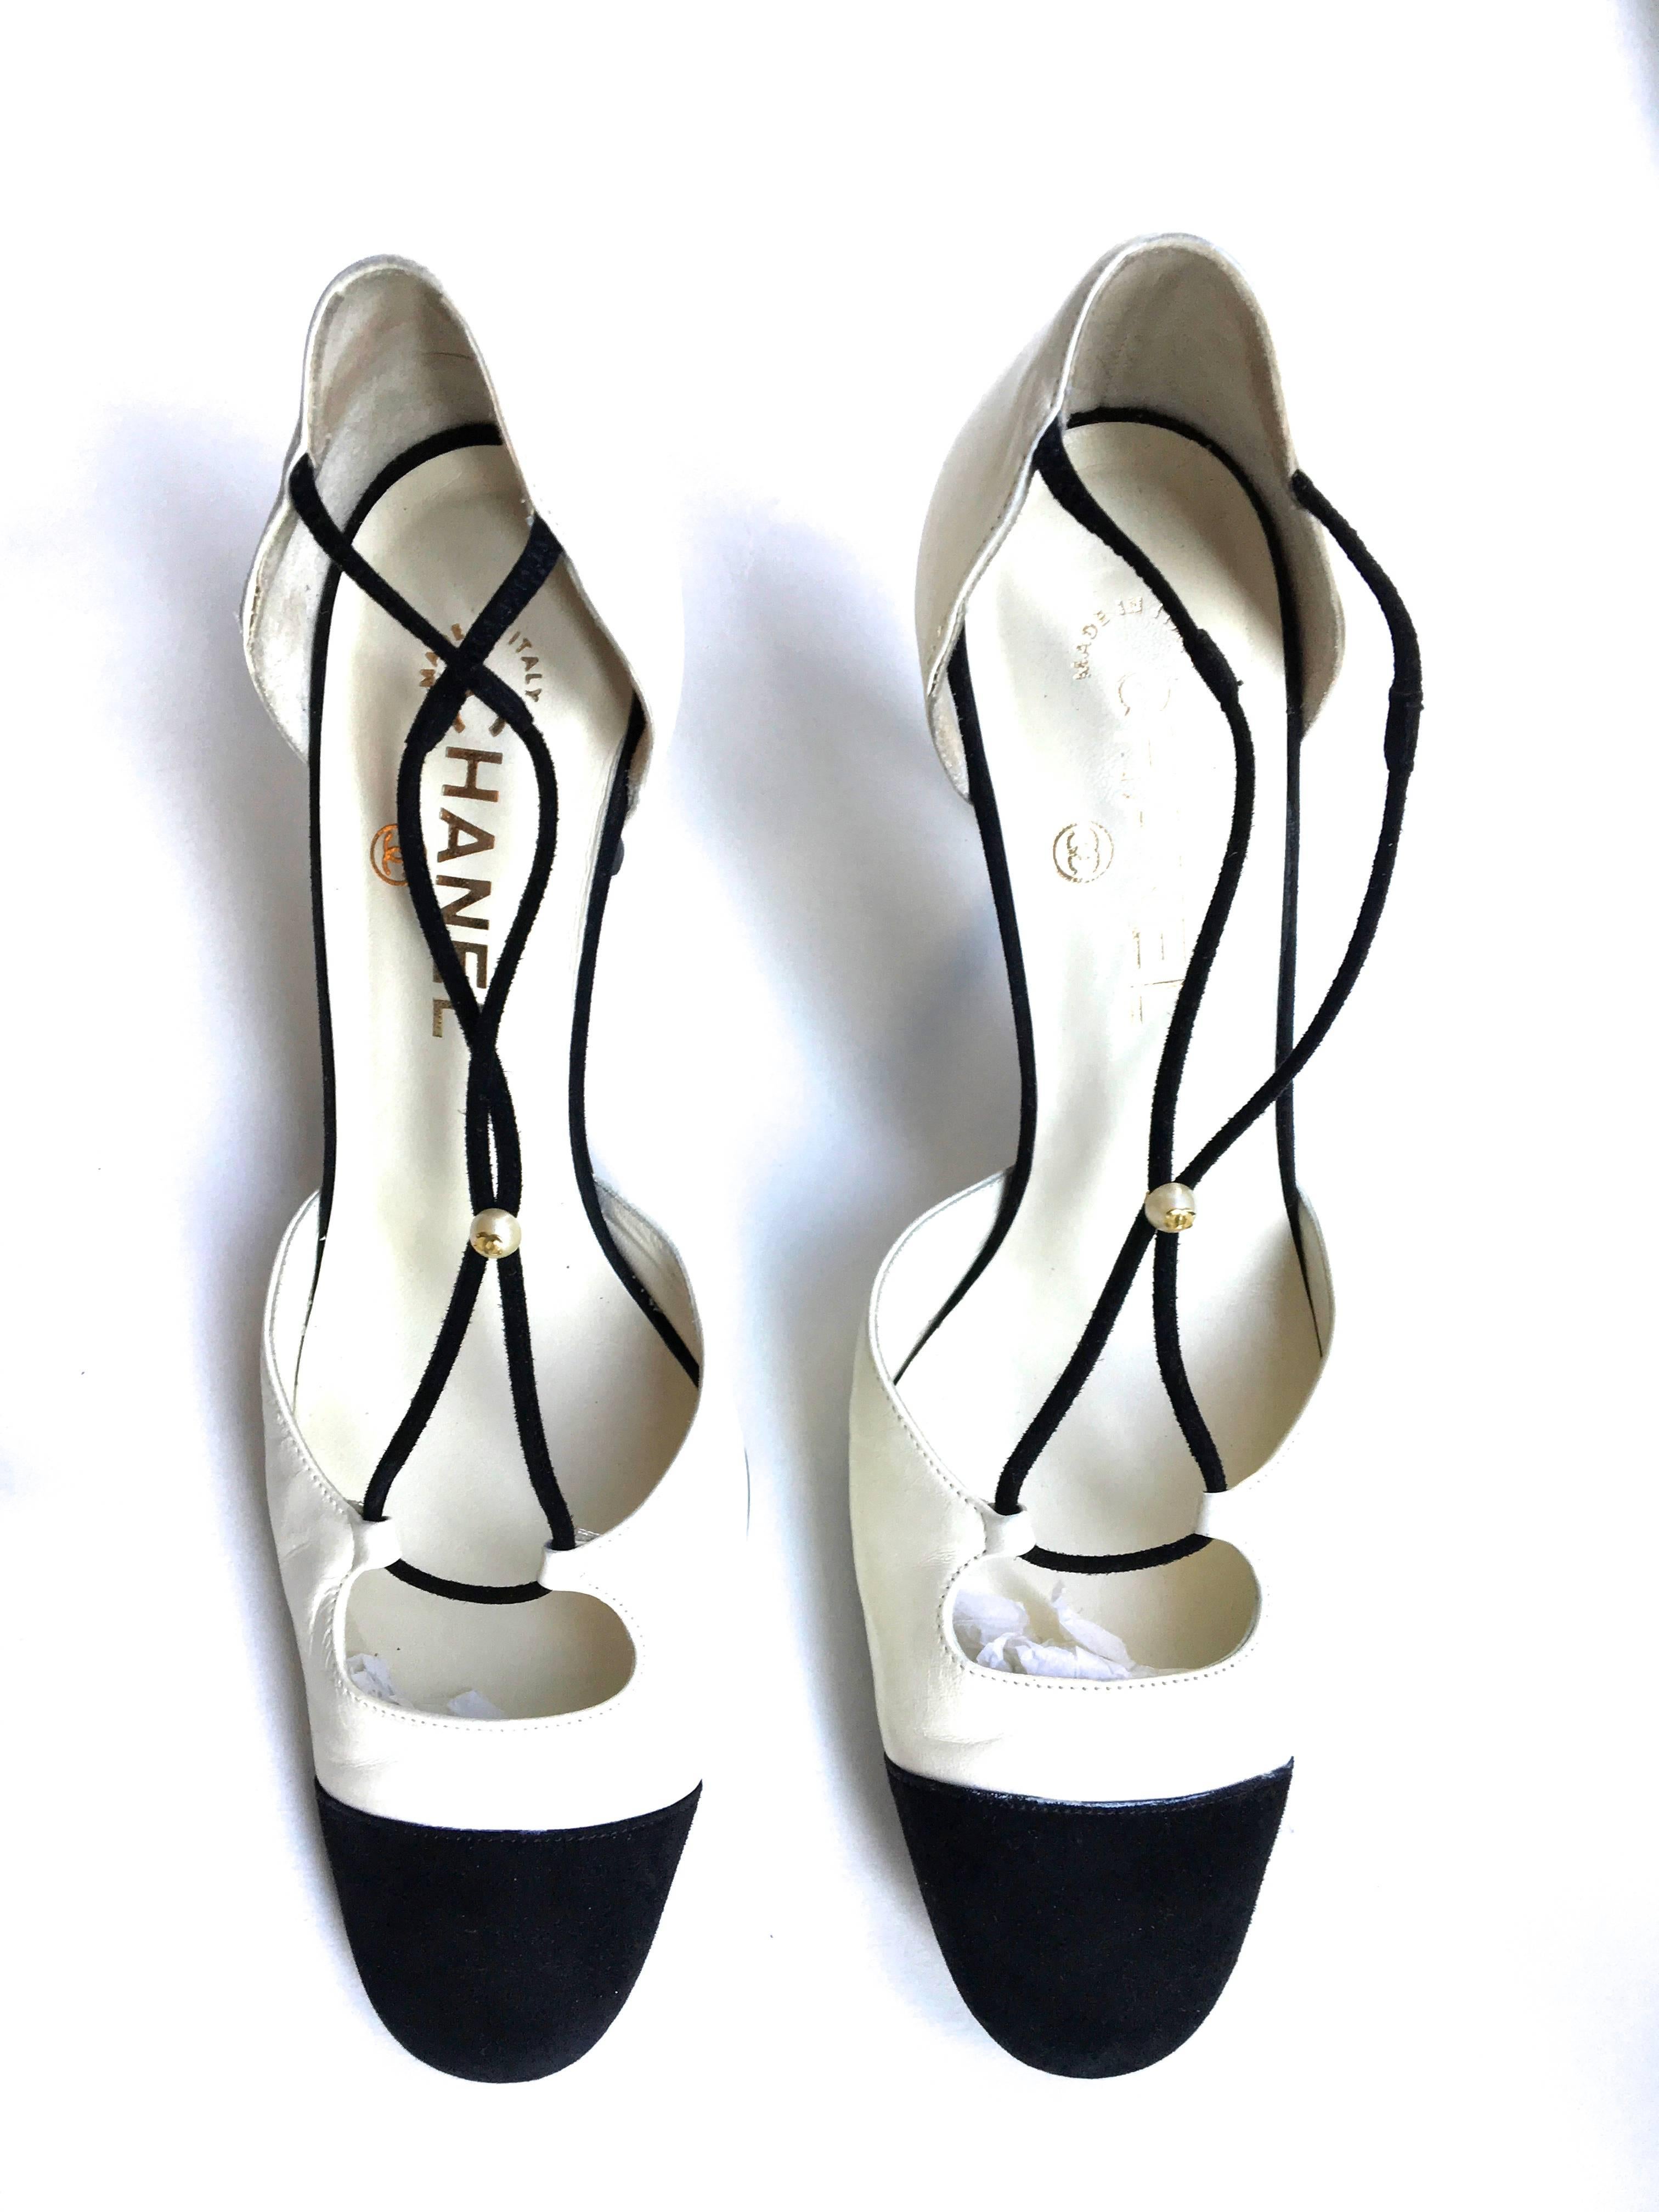 Chanel Shoes - Size 38 - Magnificent Black Suede with Creamy White Leather For Sale 2